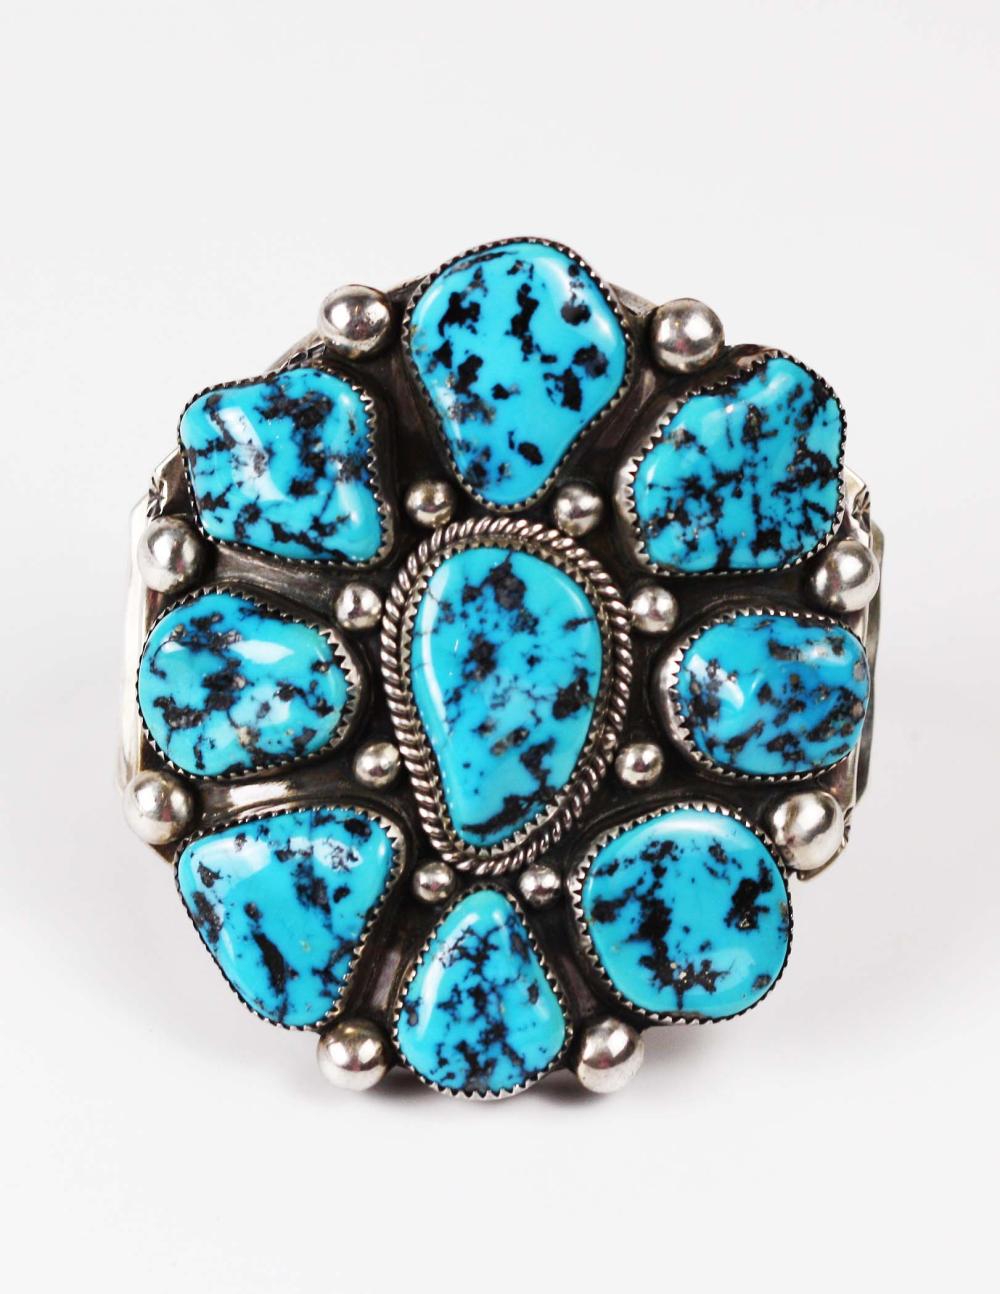 FINE NAVAJO OLD PAWN TURQUOISE 3538f4